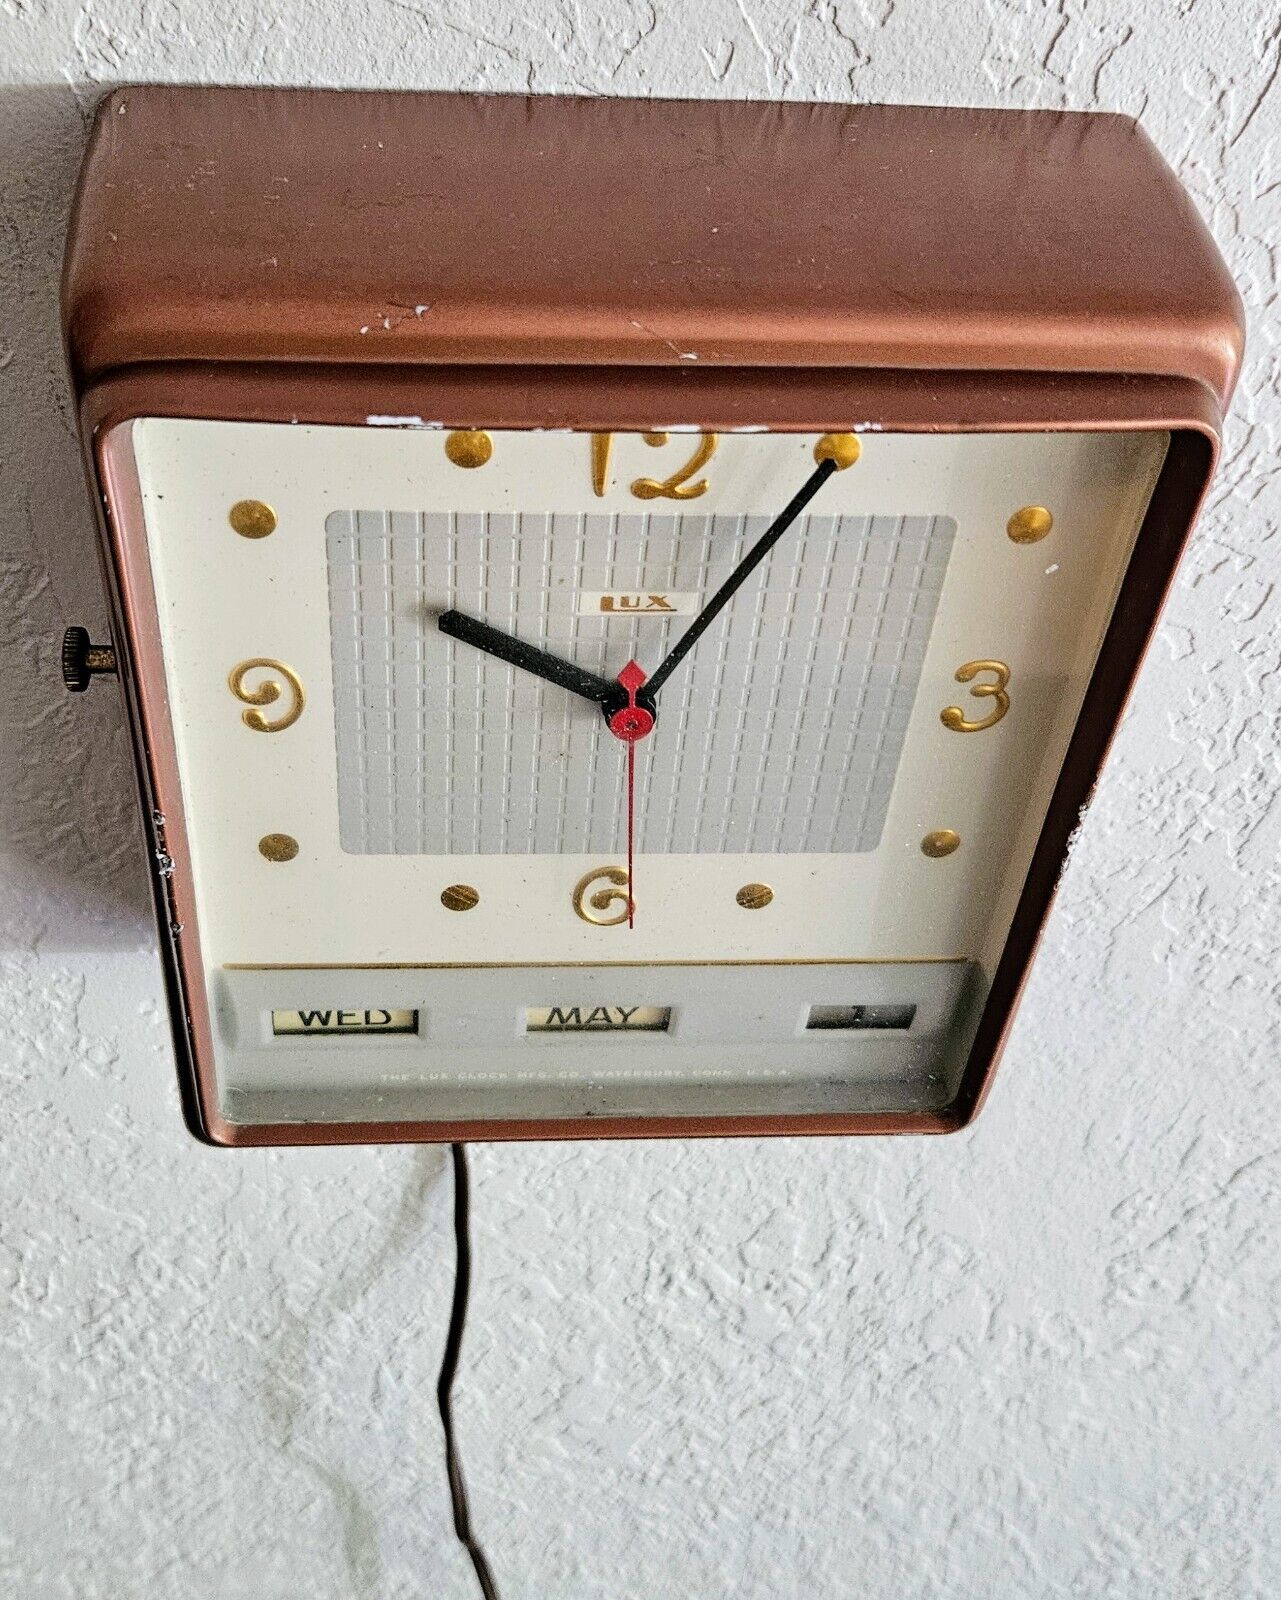 Vintage 1960s LUX Mid-Century Electric Calendar (Date Month) Wall Clock. WORKS